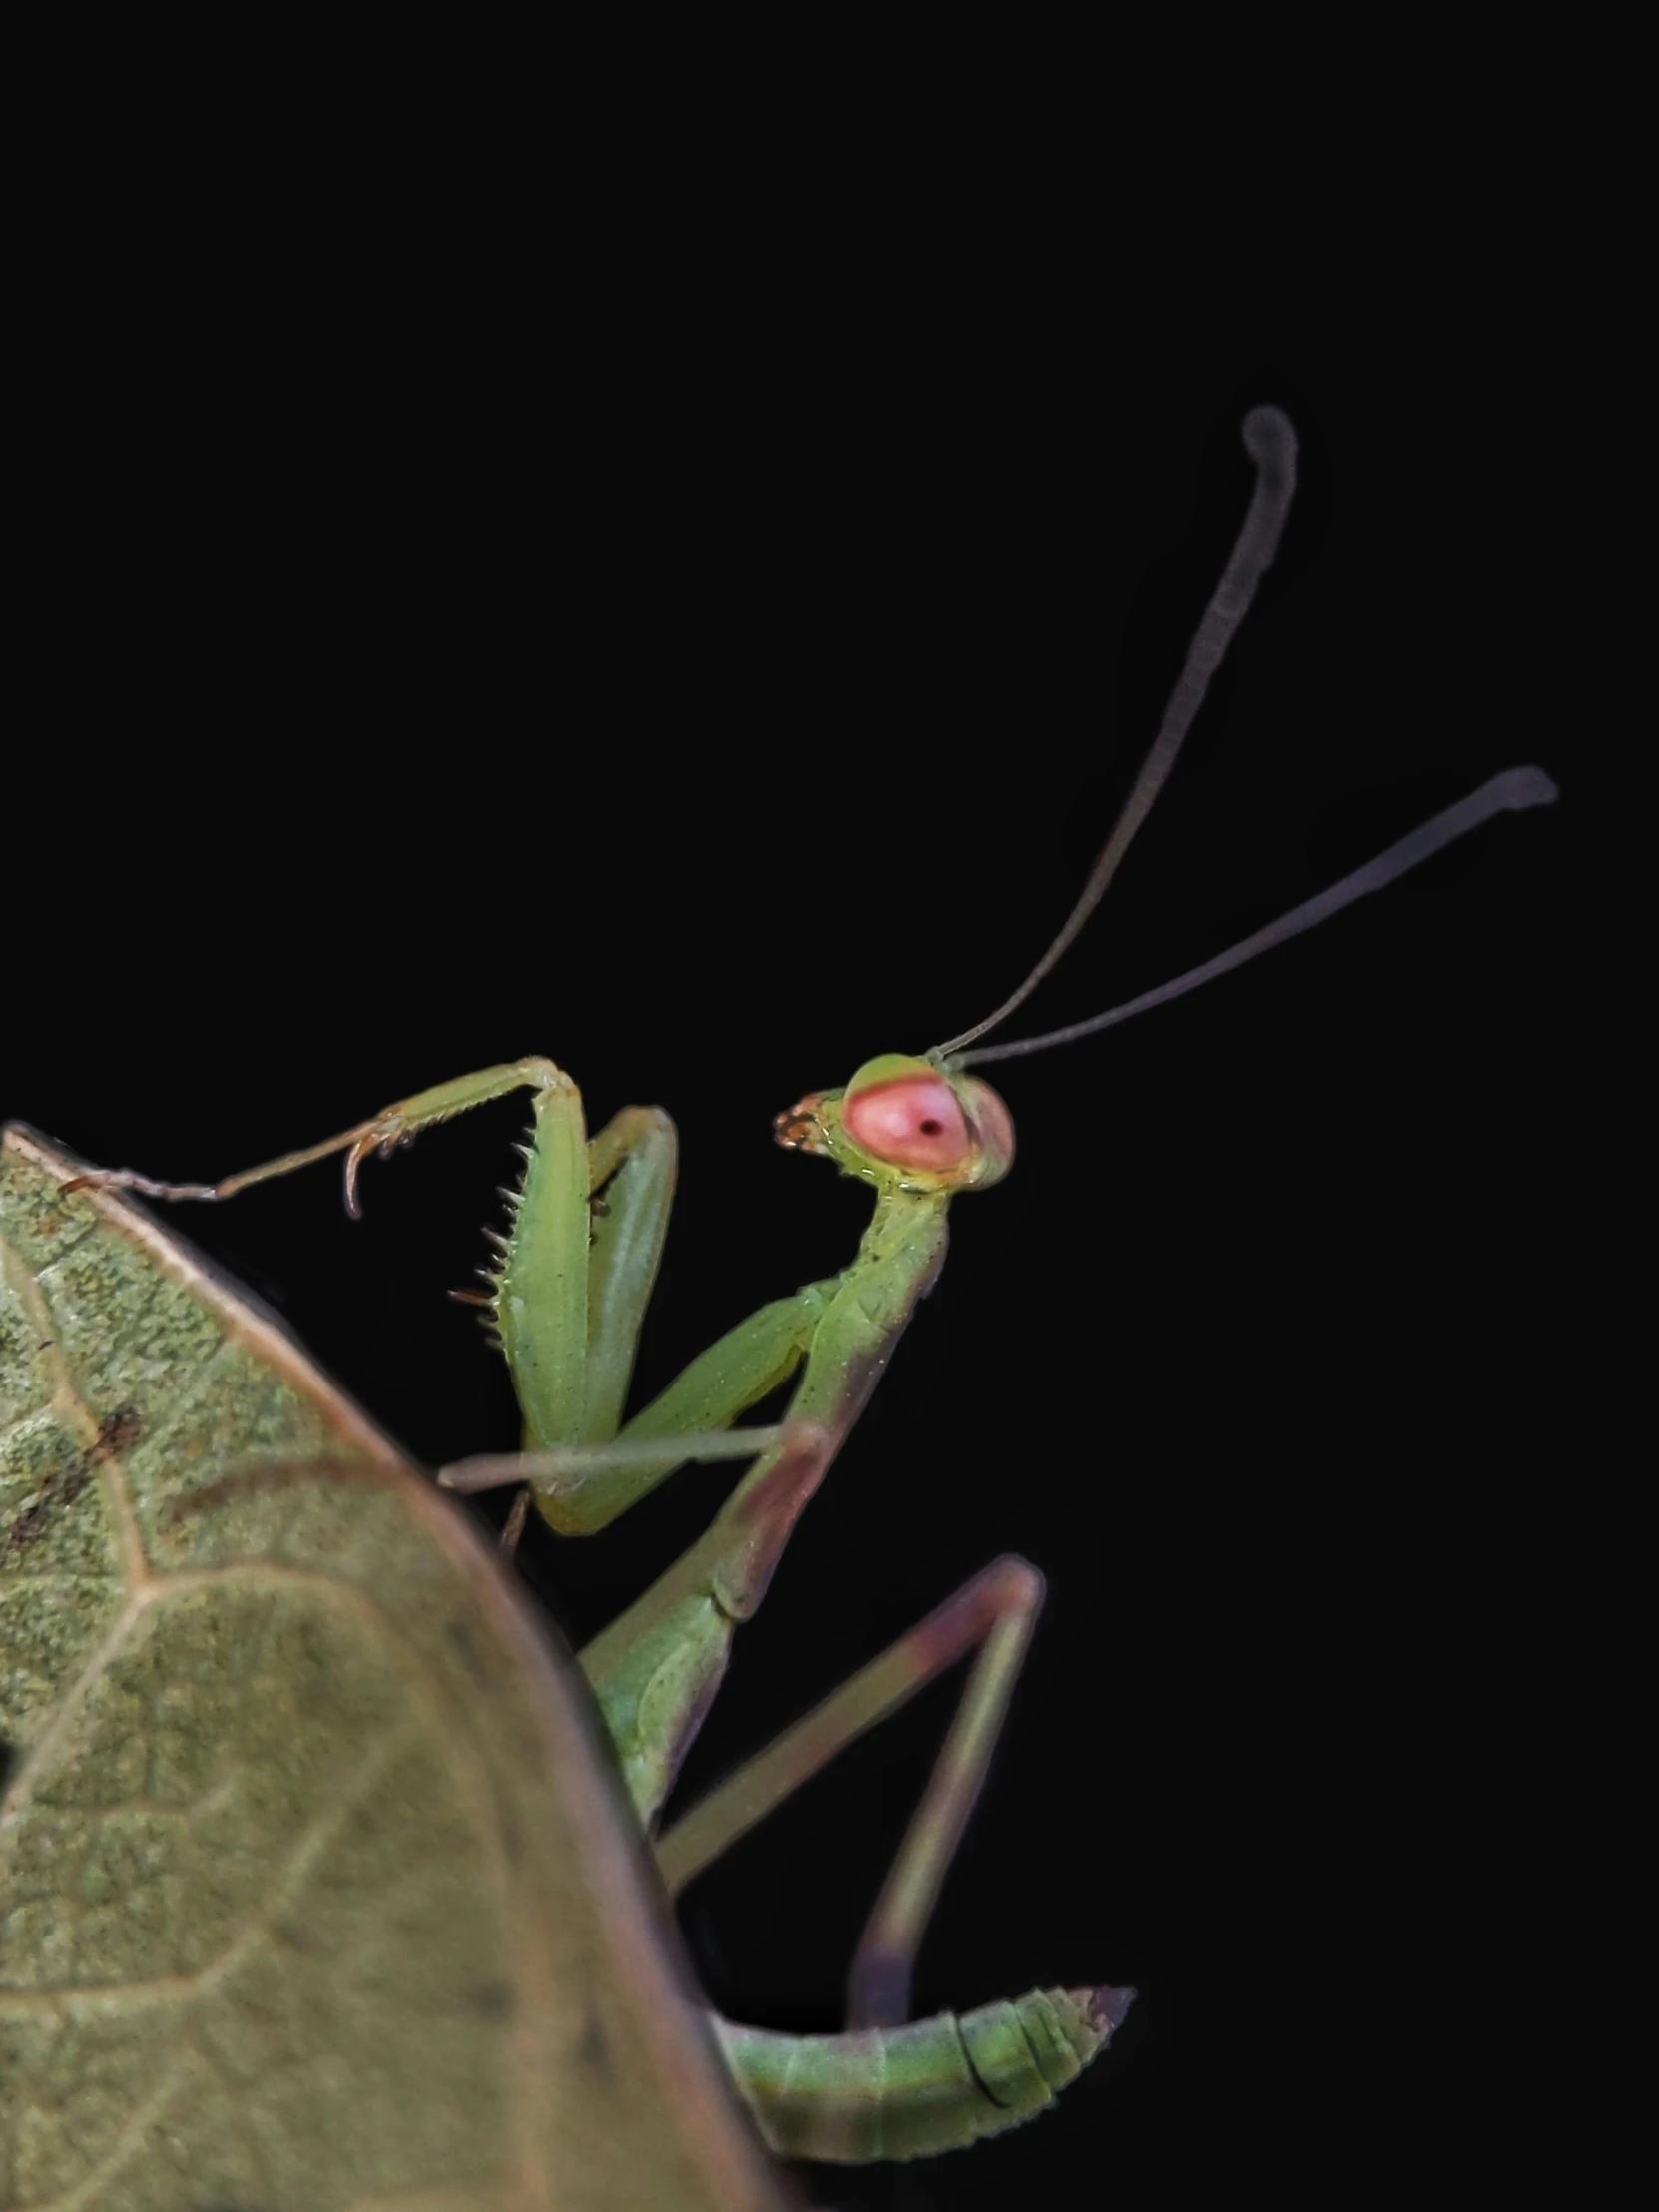 a green praying insect with two antennaes and a flower bud